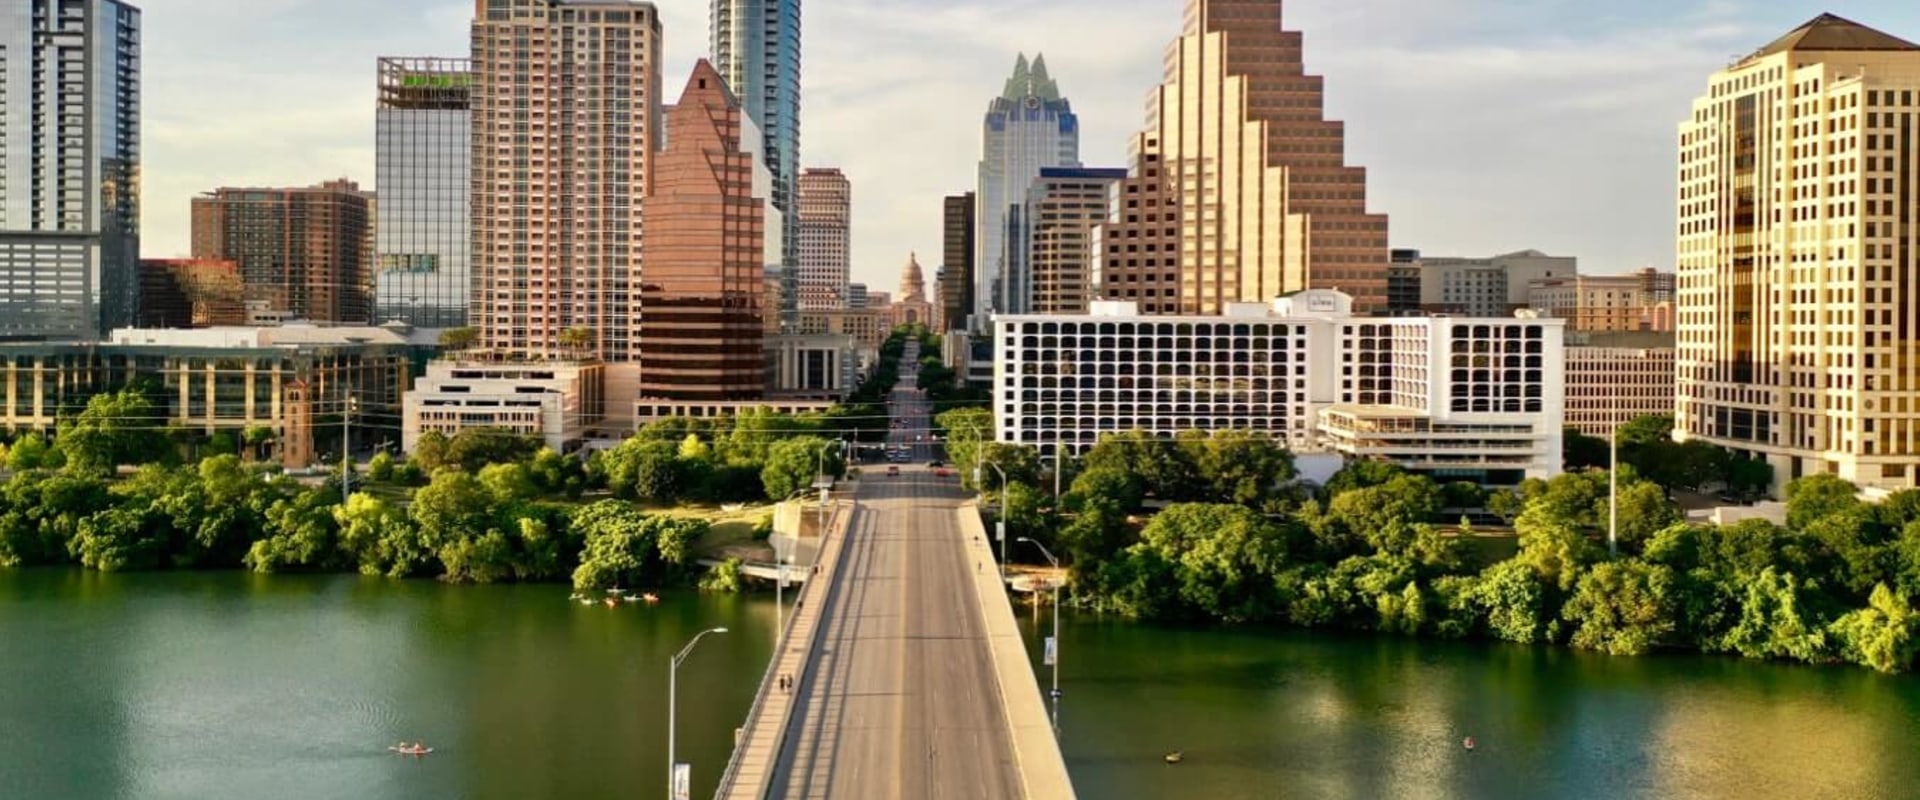 Top Things to Do in Austin Texas